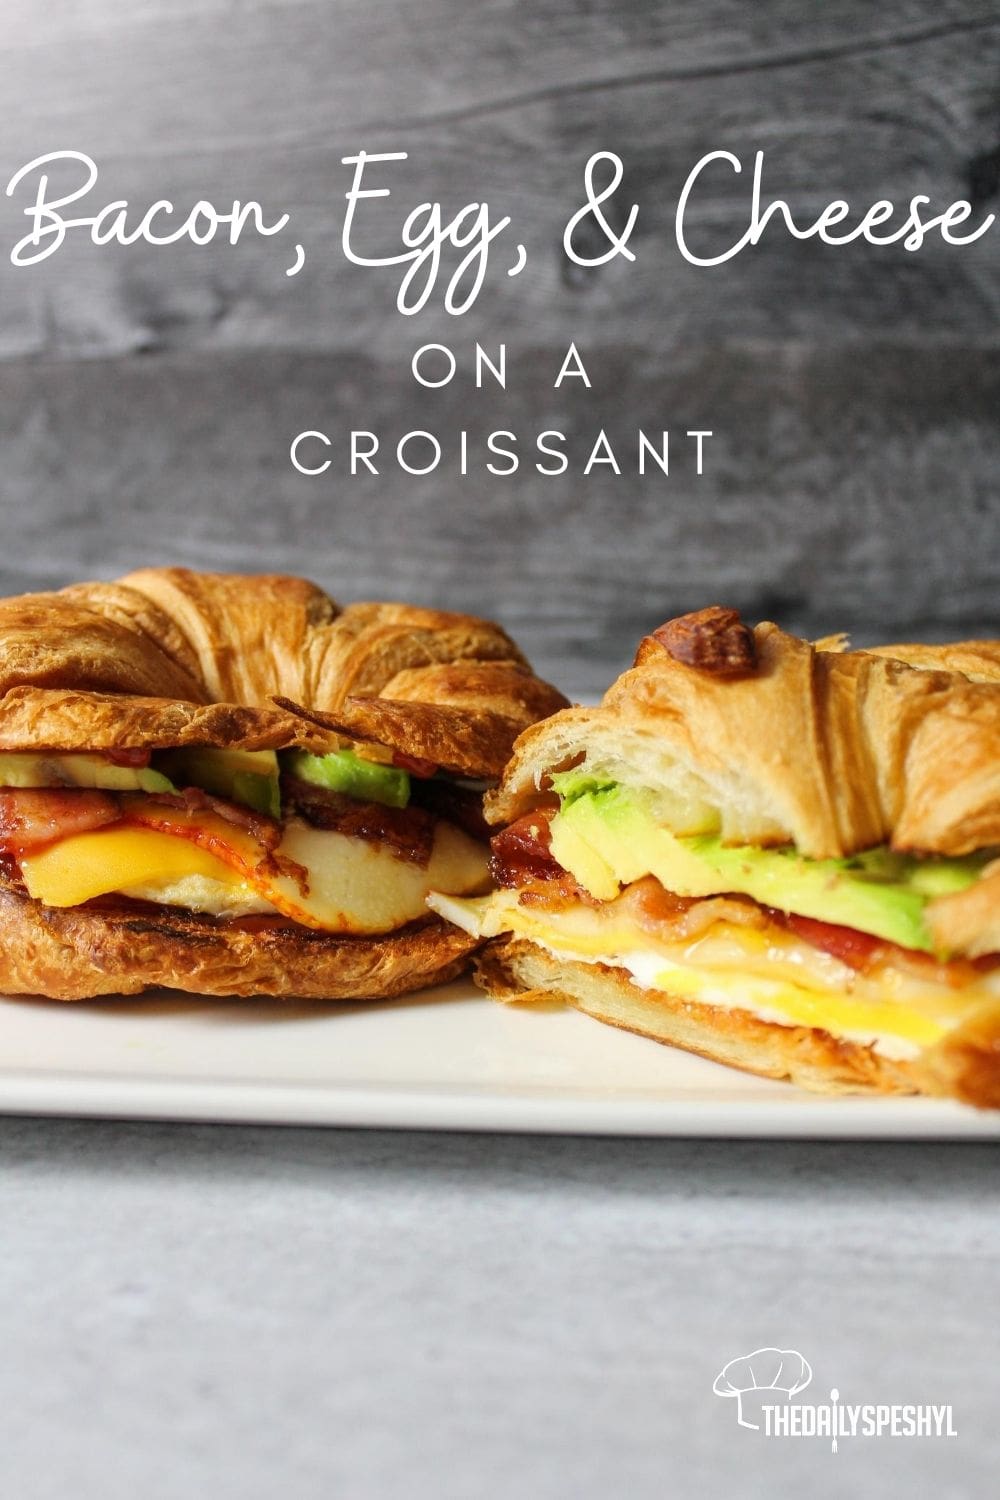 Bacon Egg & Cheese Croissant Sandwich - The Daily Speshyl